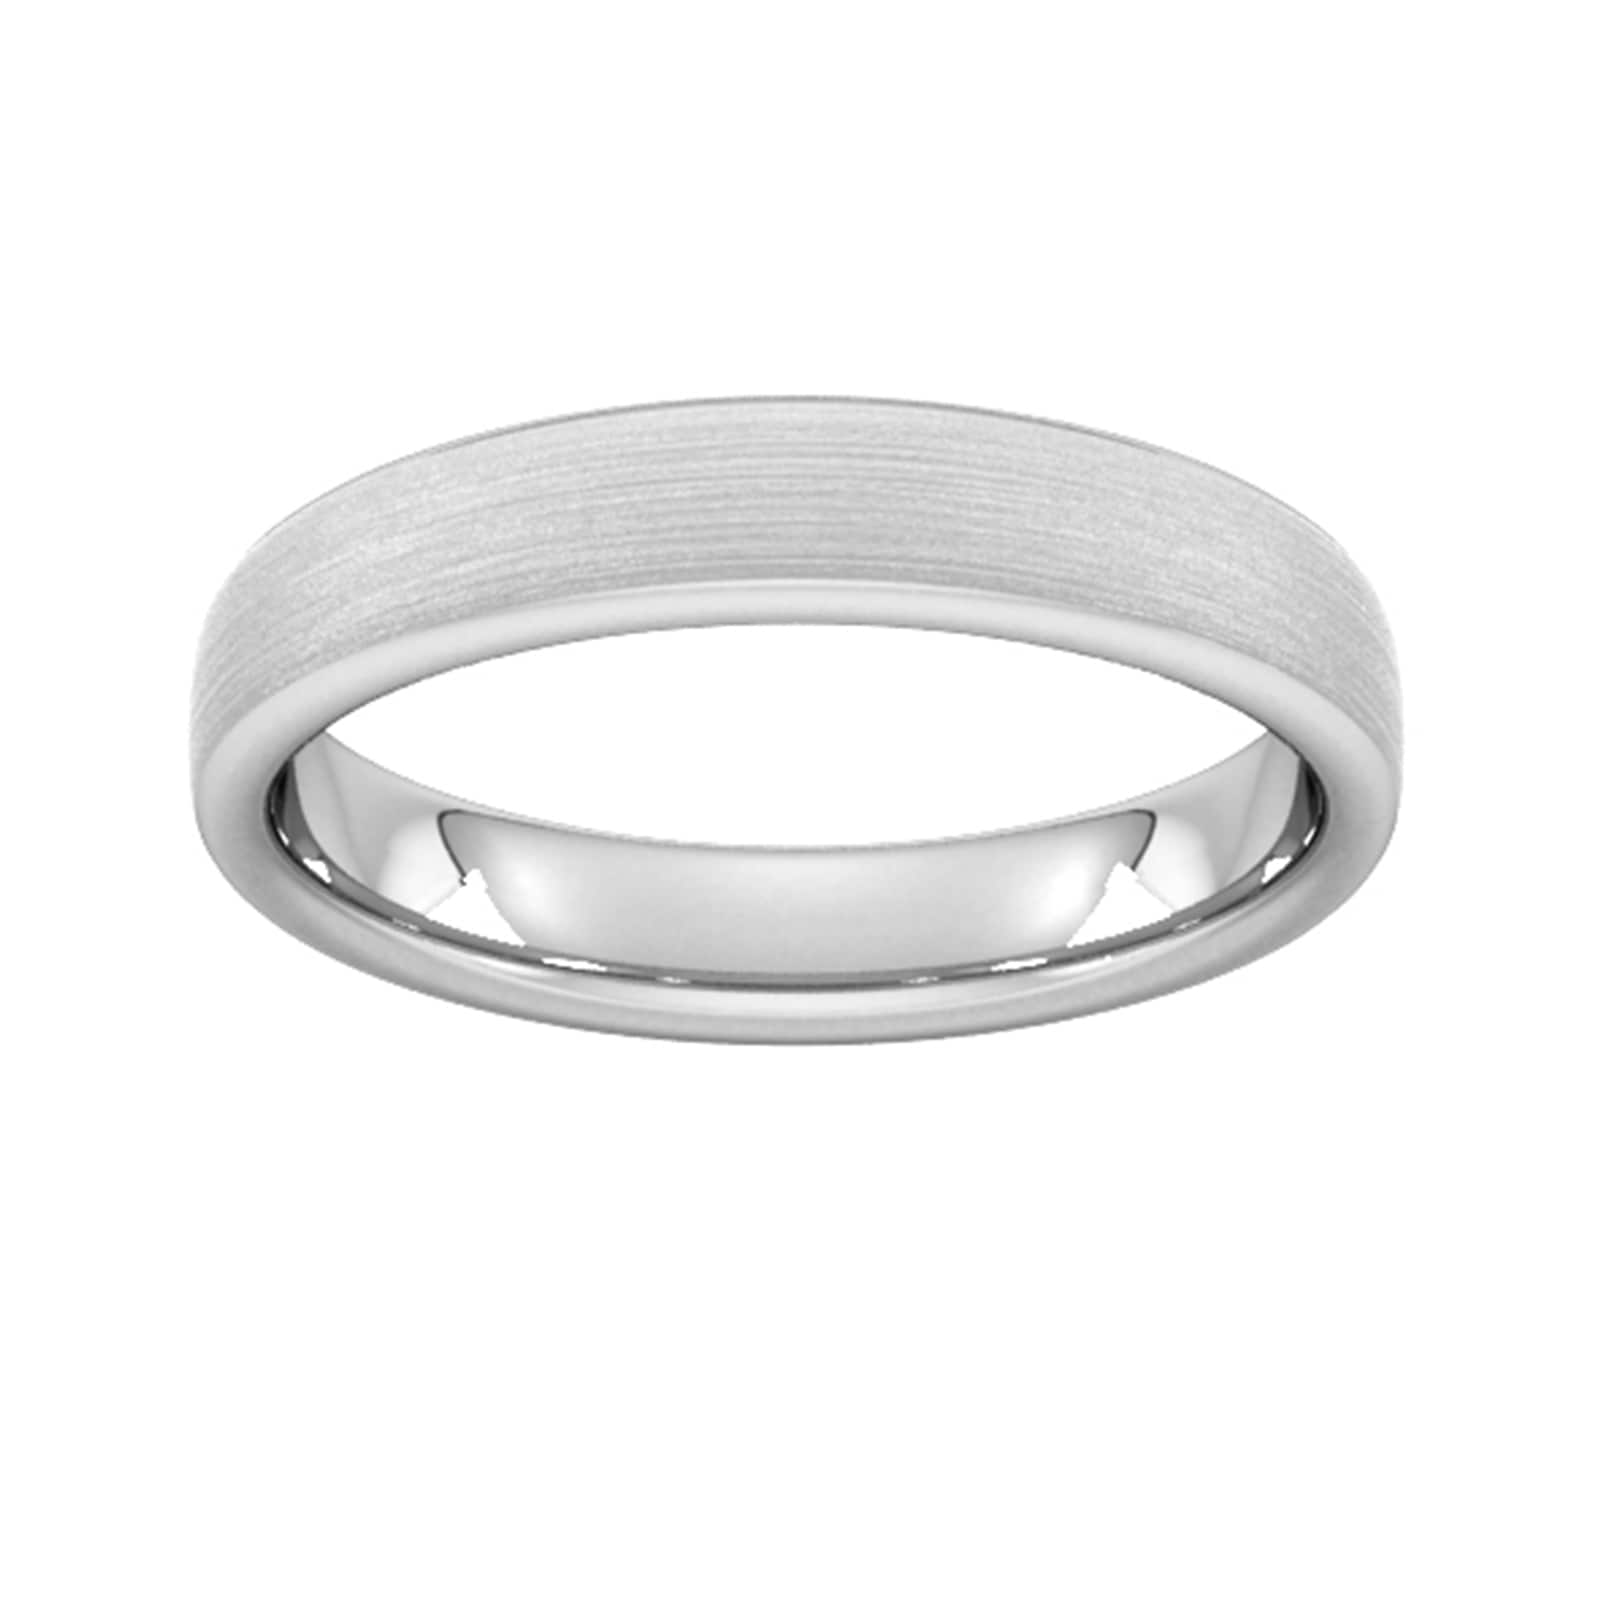 4mm D Shape Heavy Matt Finished Wedding Ring In 18 Carat White Gold - Ring Size X